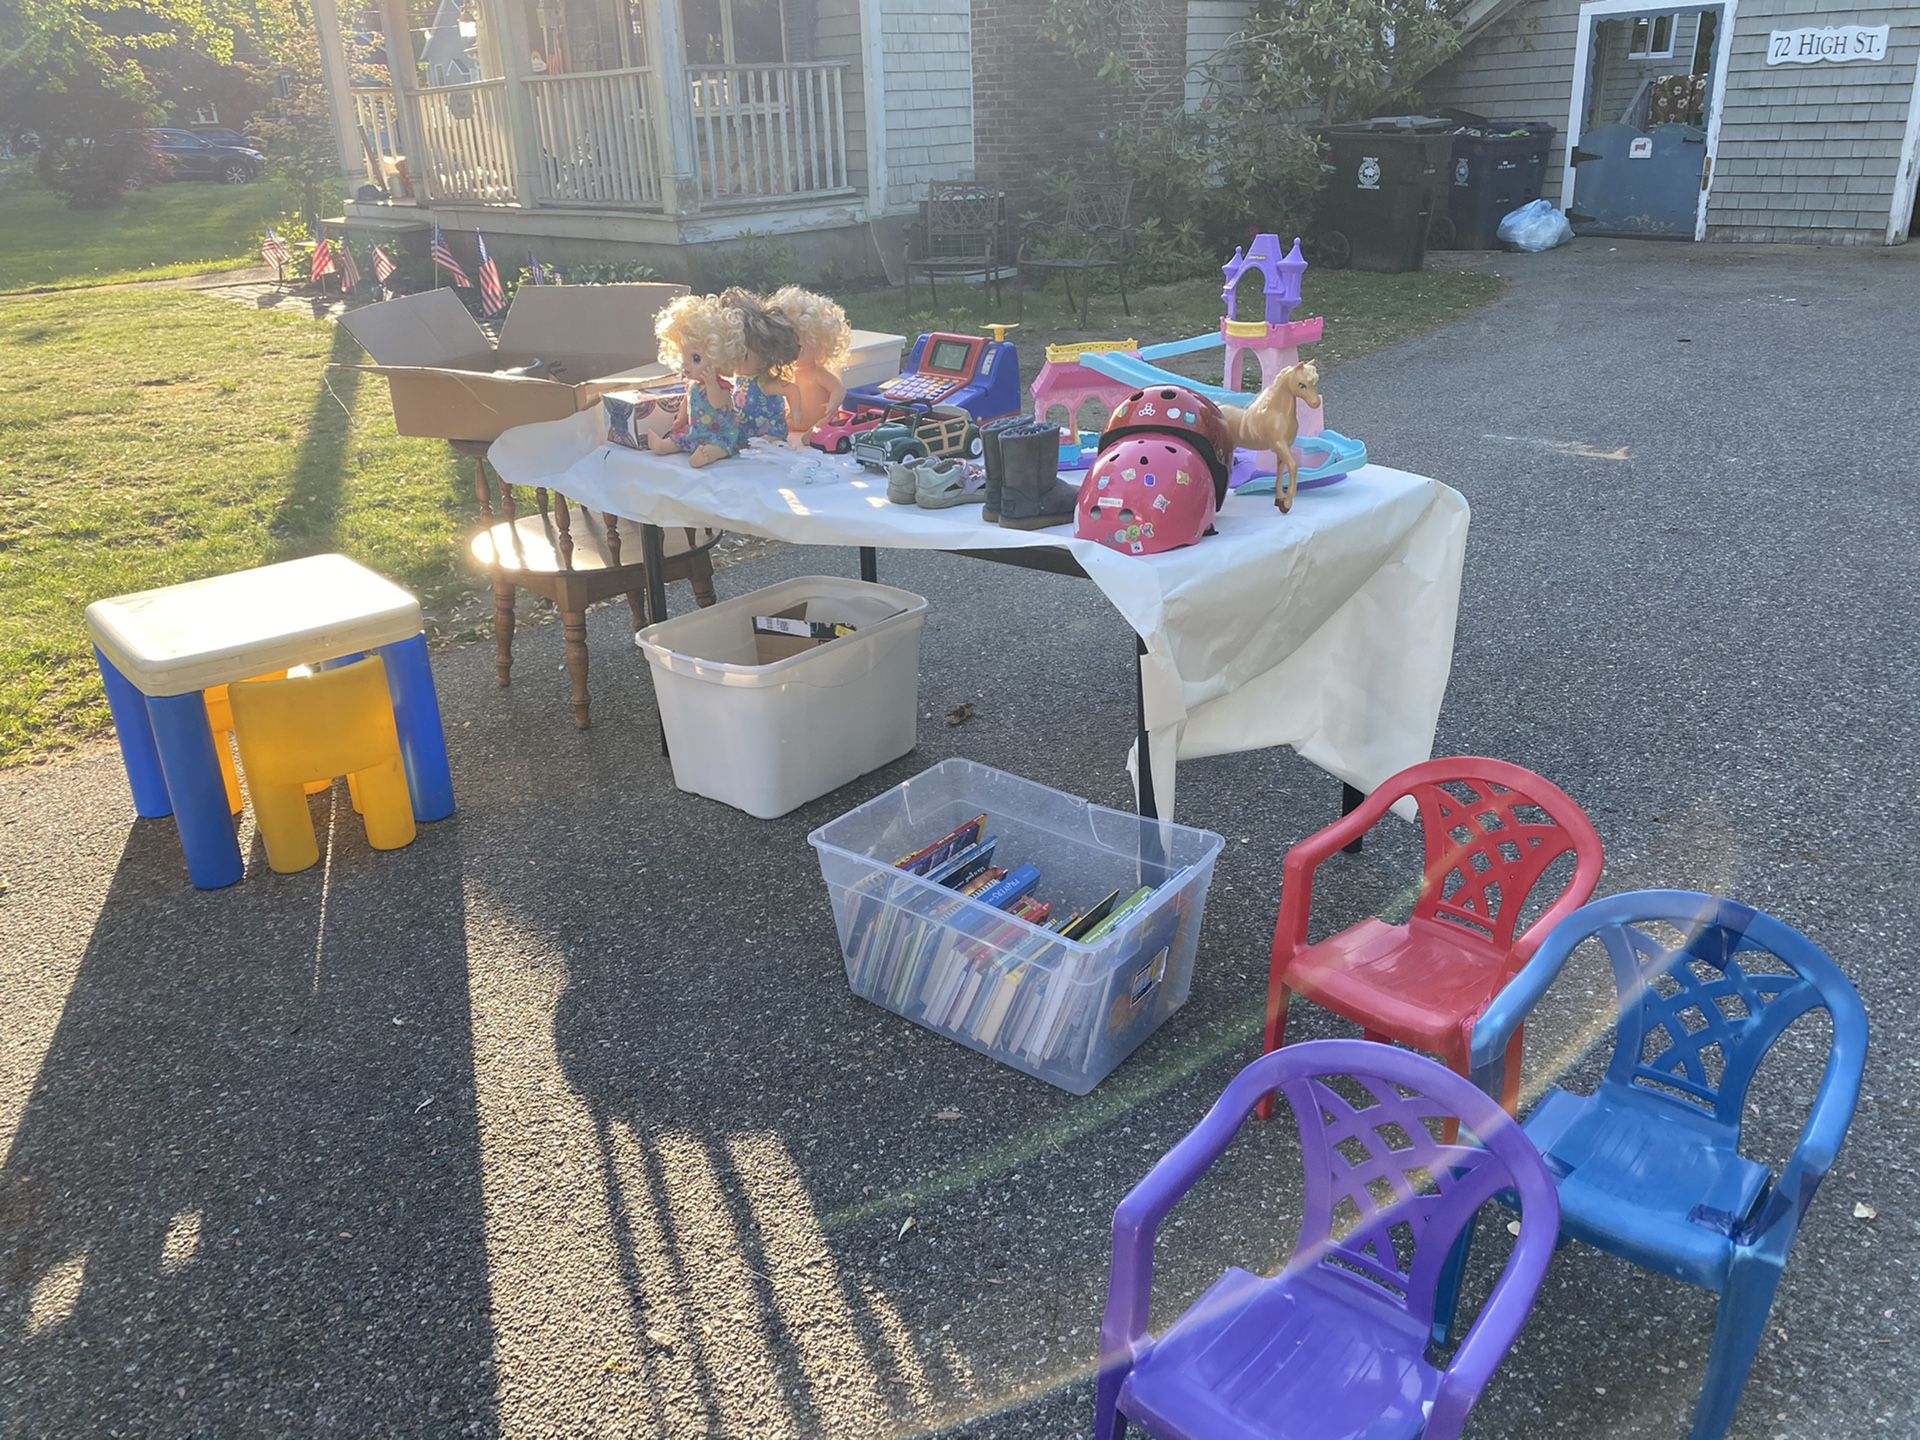 FREE toys at 72 High St, Wilmington